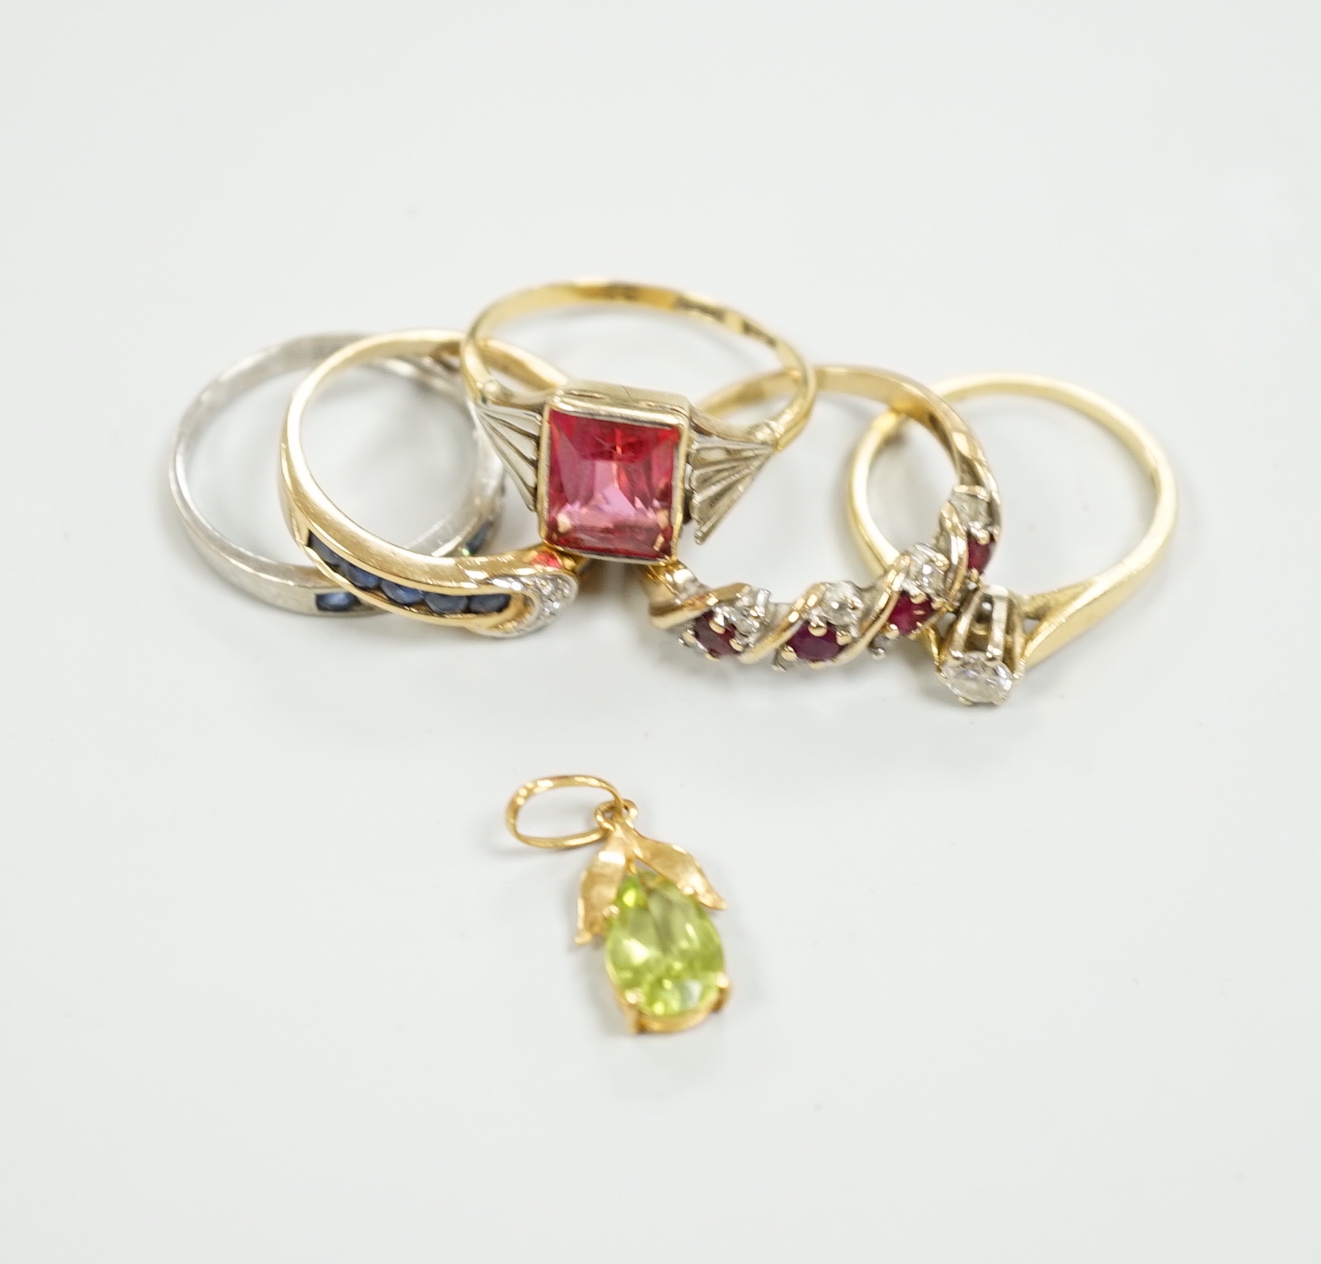 Three assorted 9ct gold and gem set rings, gross 6.7 grams, two 18ct and gem set rings including solitaire diamond and a 750 and gem set small pendant, gross 6.1 grams.